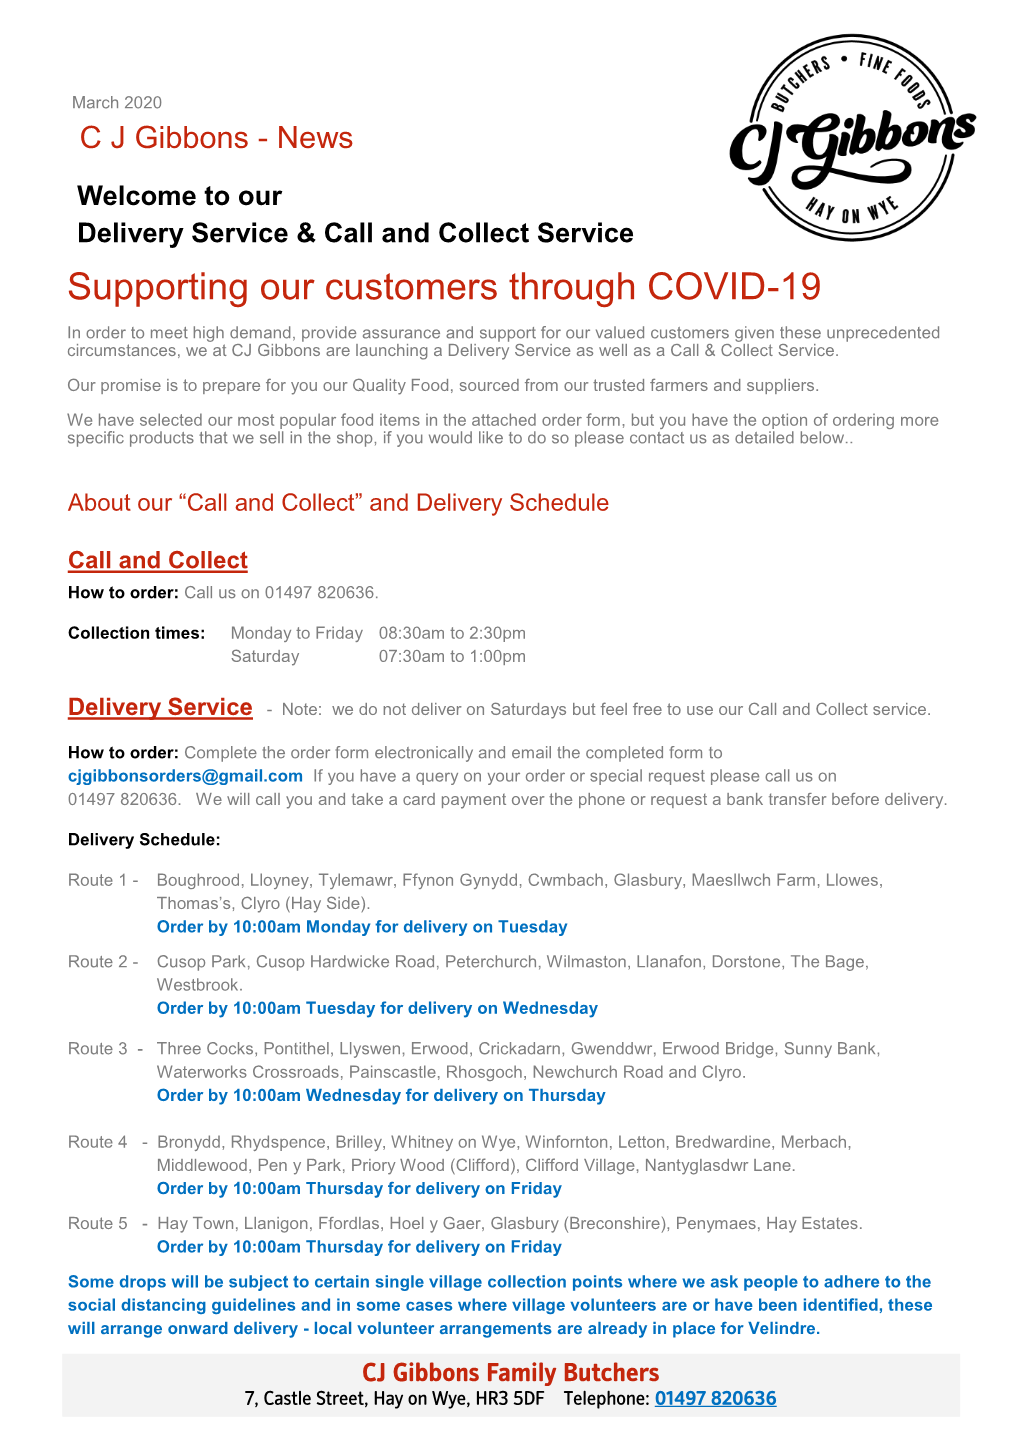 Supporting Our Customers Through COVID-19